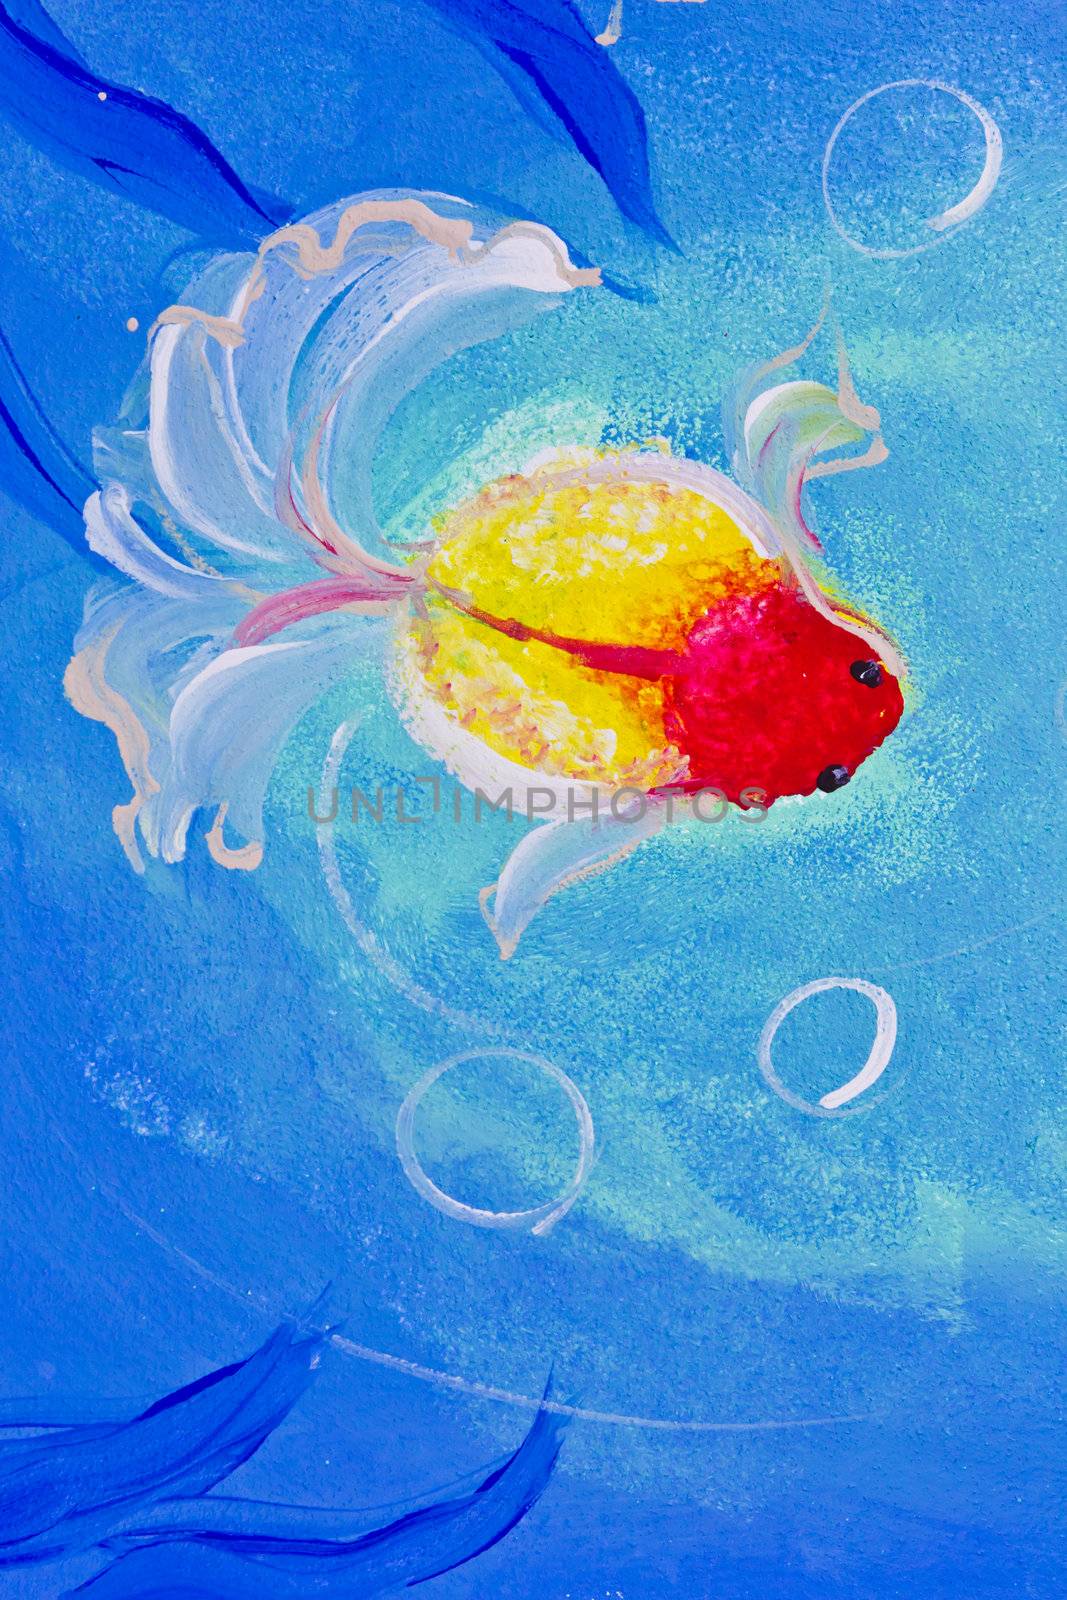 painting of goldfish in water by tungphoto